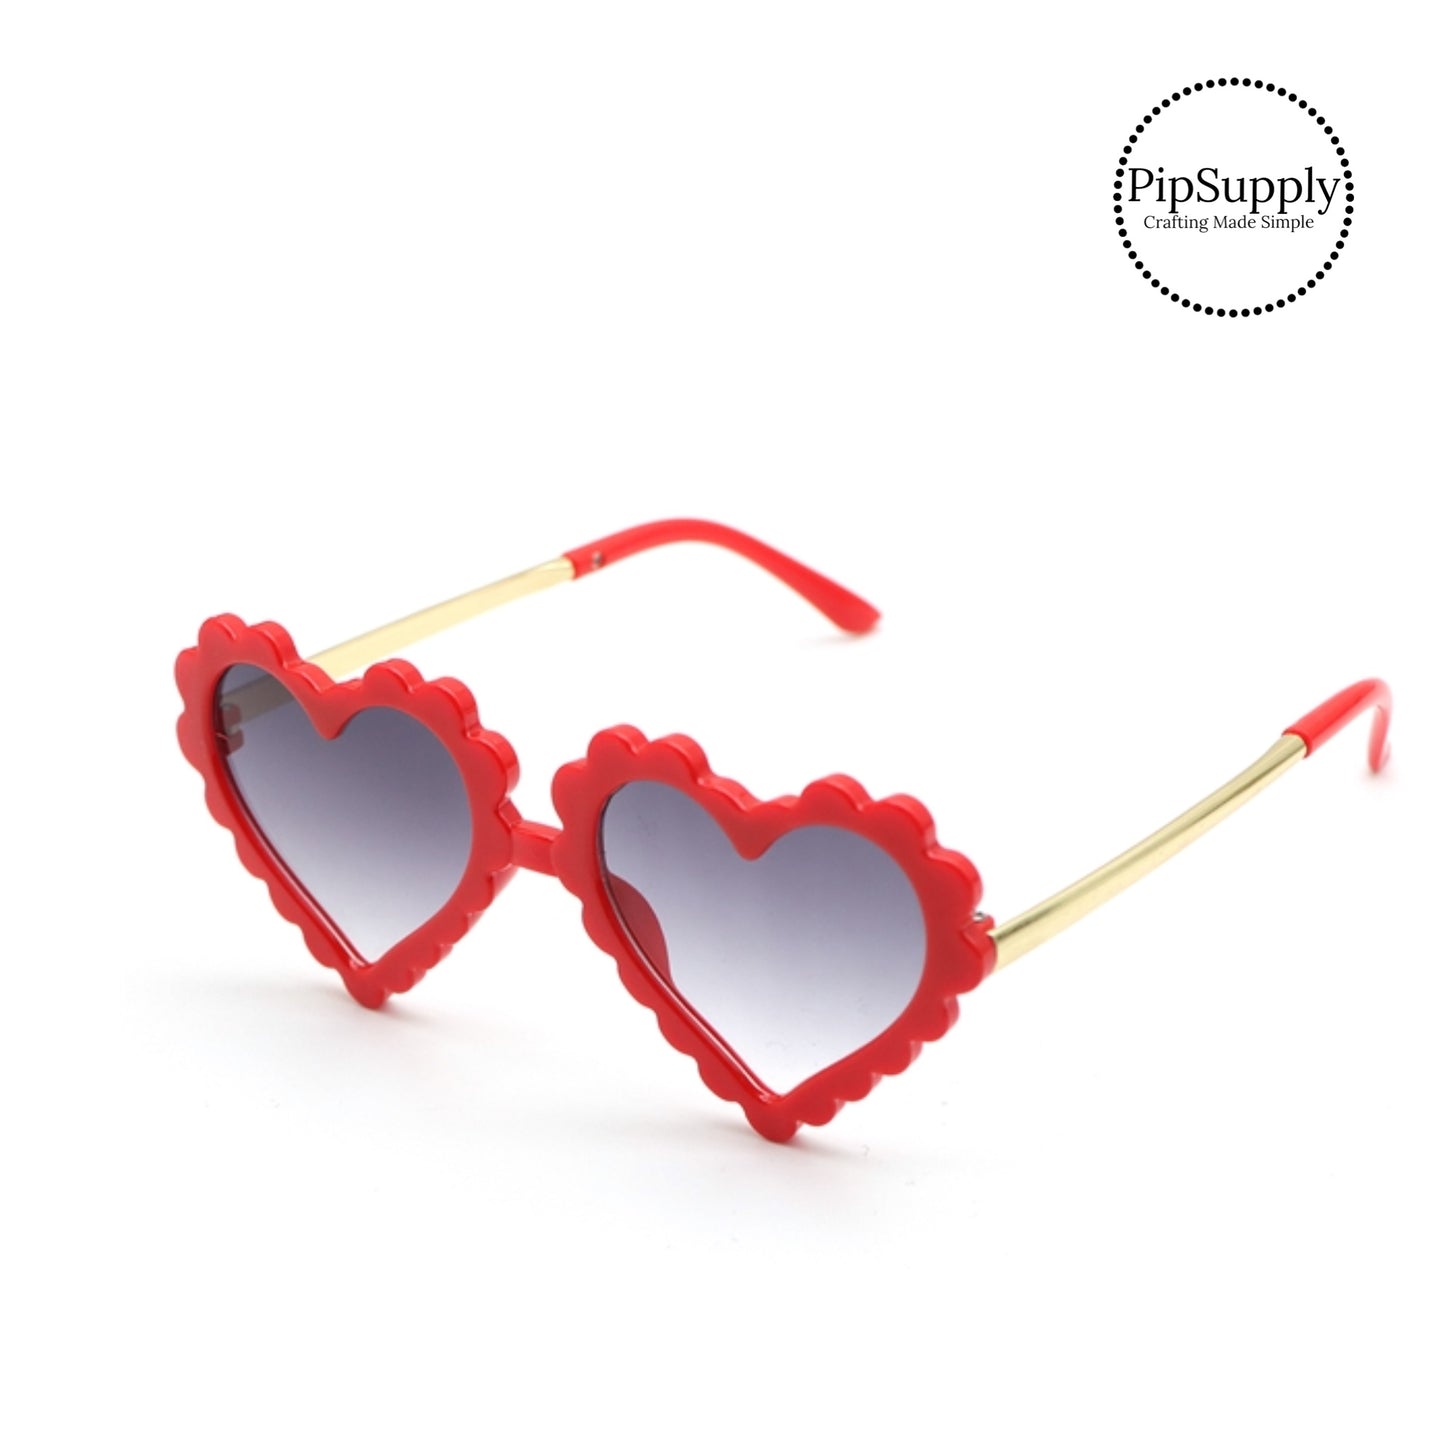 Solid red scalloped heart sunglasses